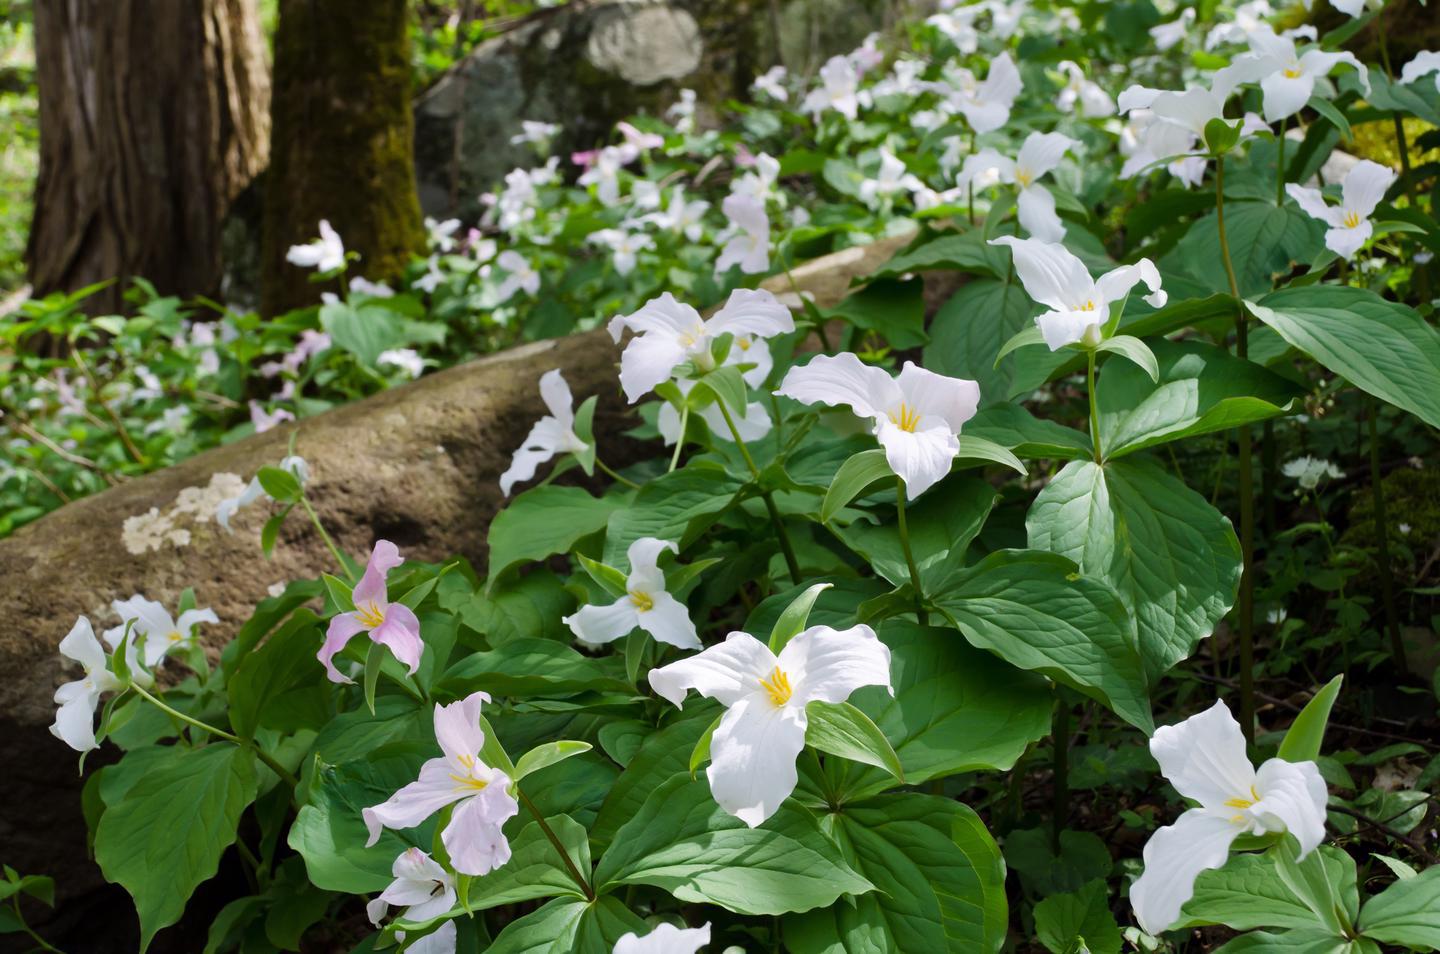 The "Wildflower National Park"Wildflowers, such as these white trillium, can be found blooming from February through November in the park.